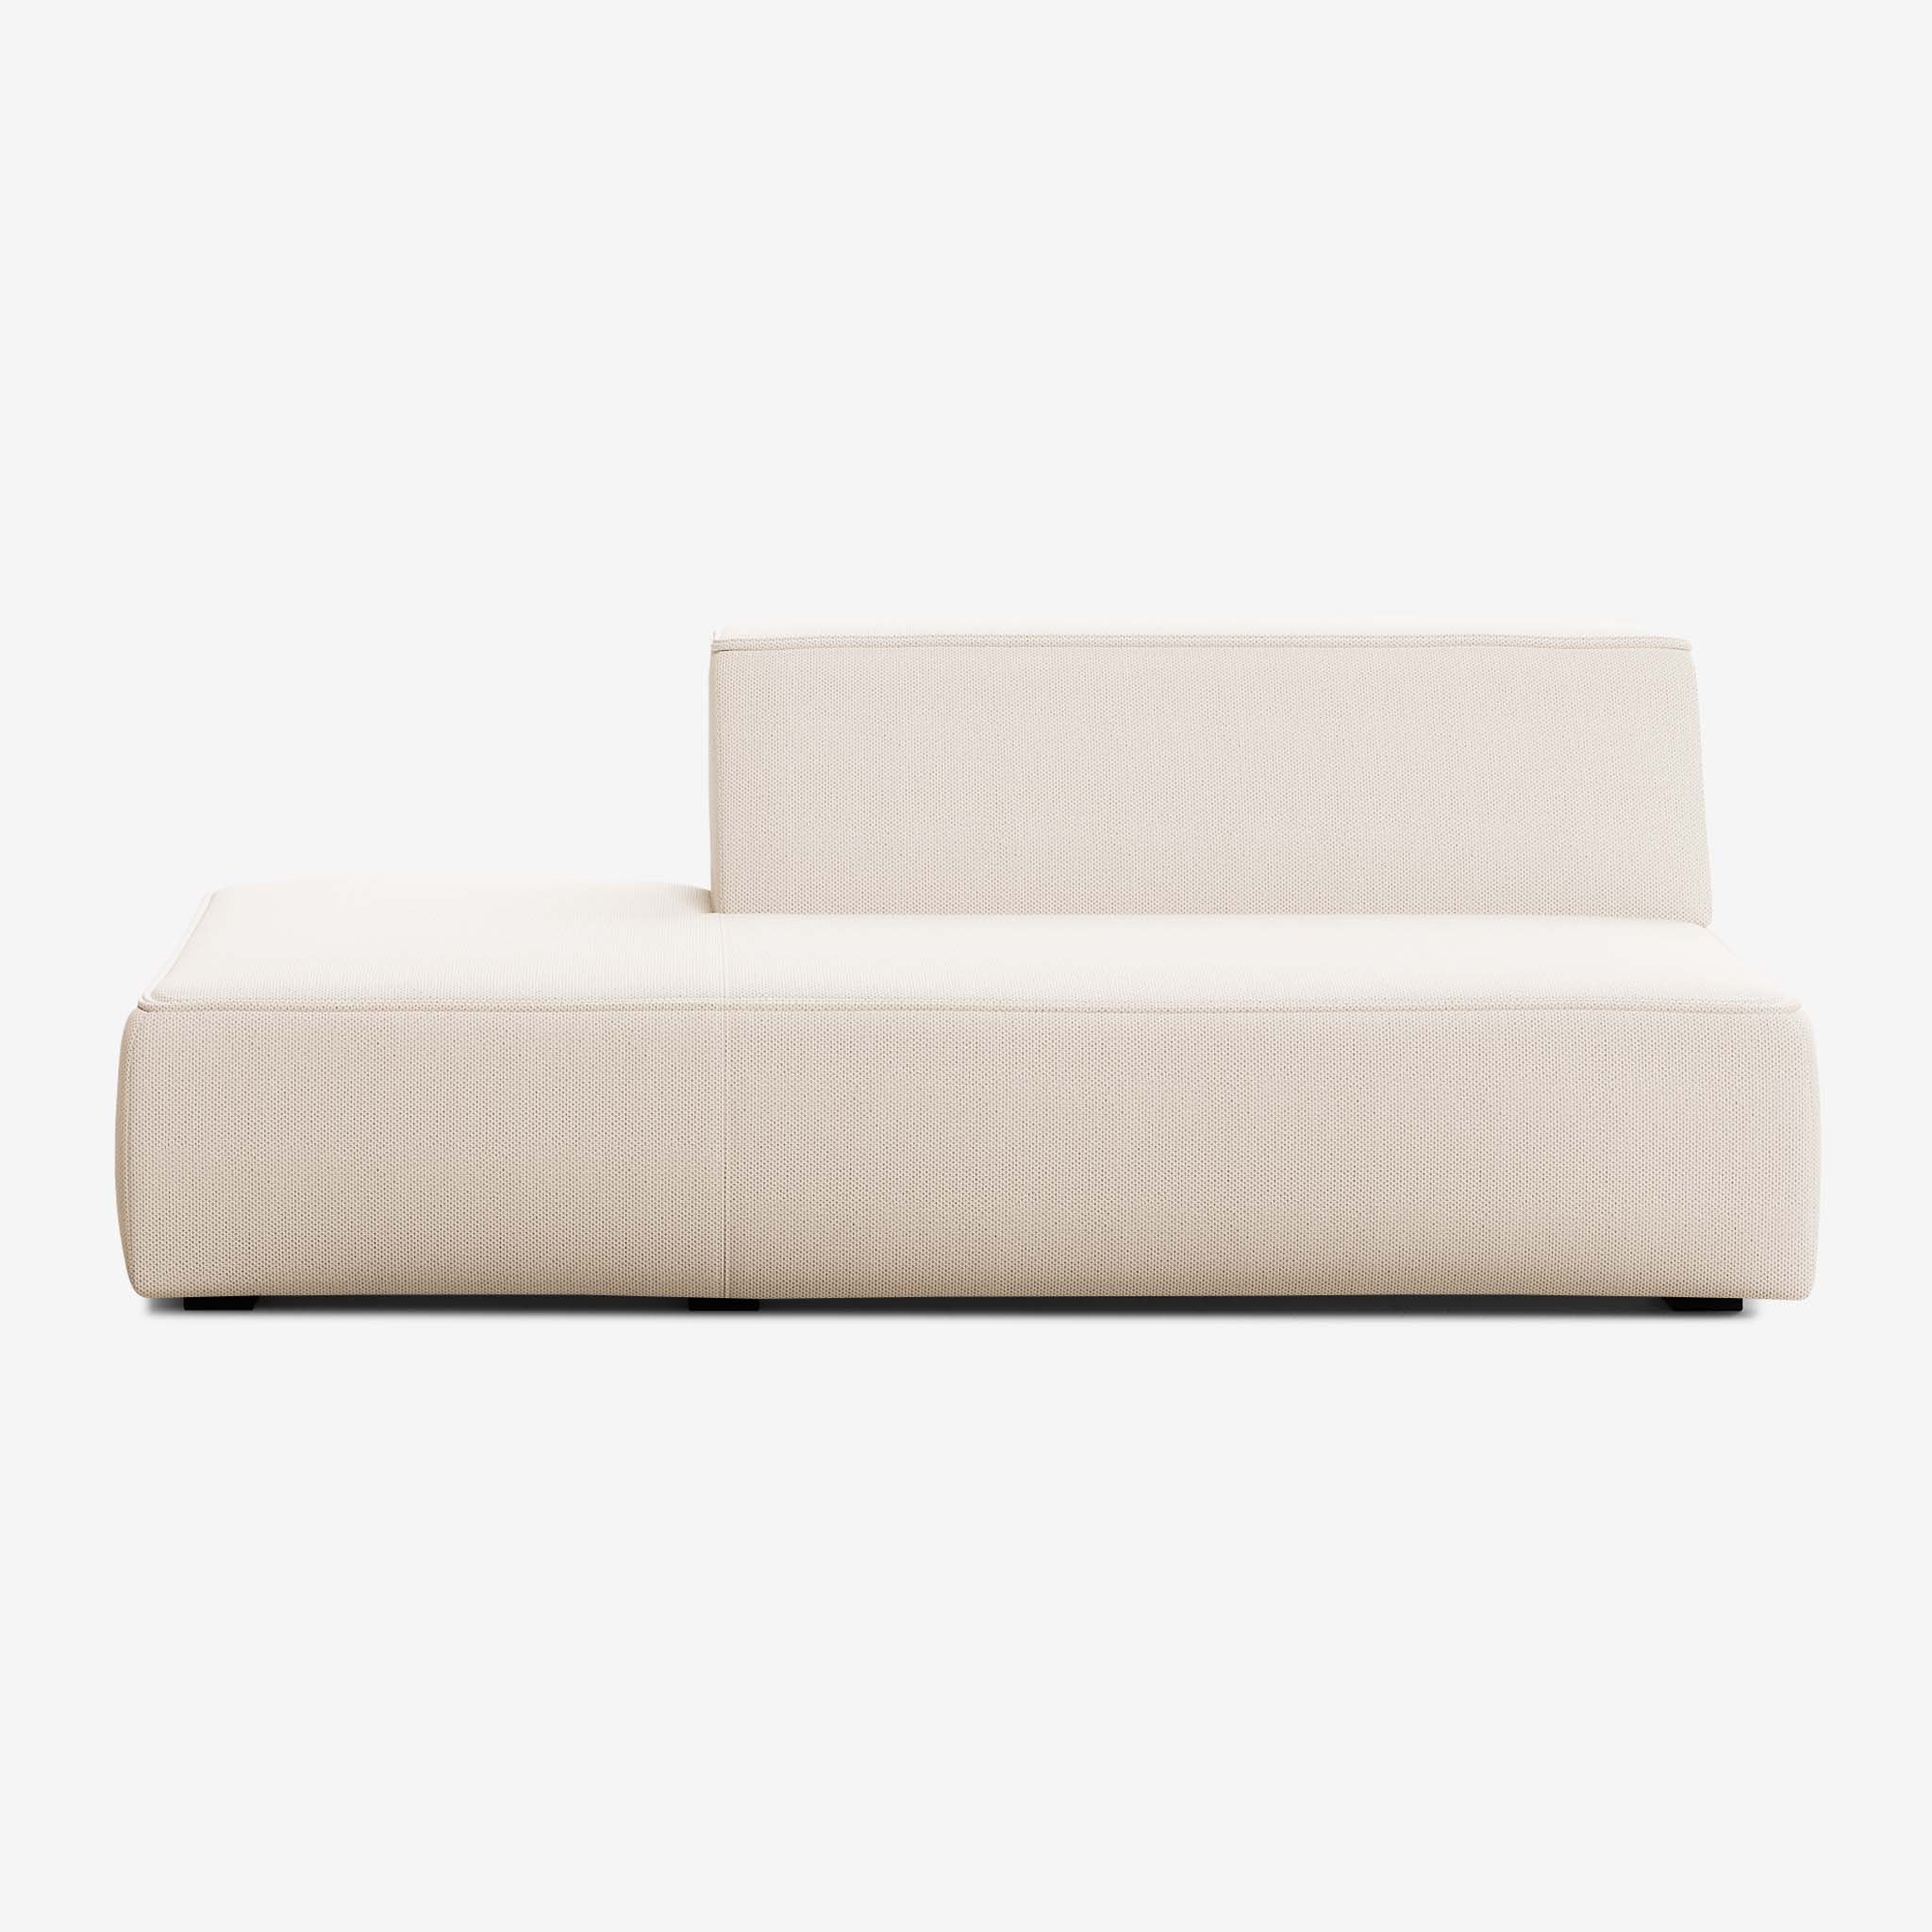 Meester Sofa Lounge Large Left